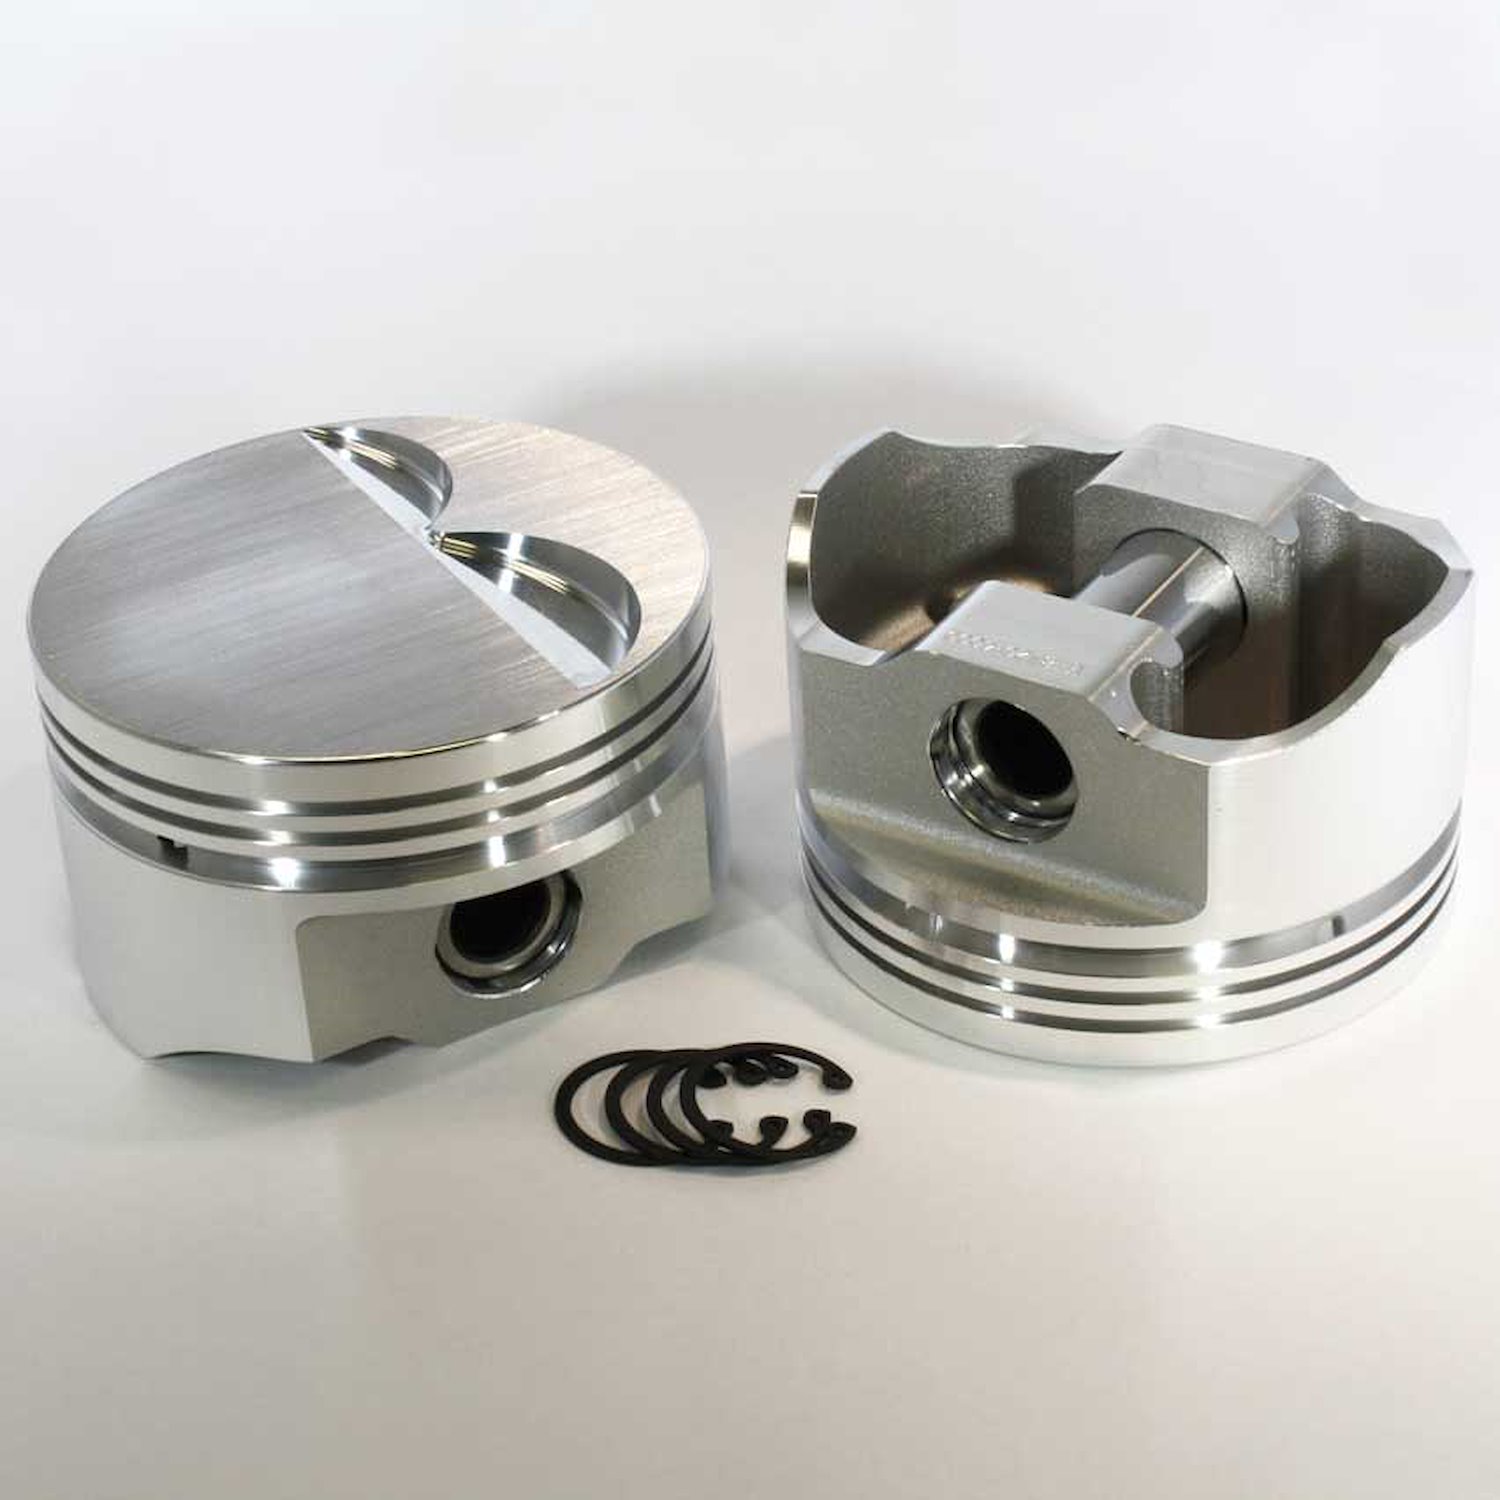 8785-4060 E-Series Flat Top Piston Set for 1999-2019 Chevy LS, 4.060 in. Bore, -3cc Volume [OEM Stroke]